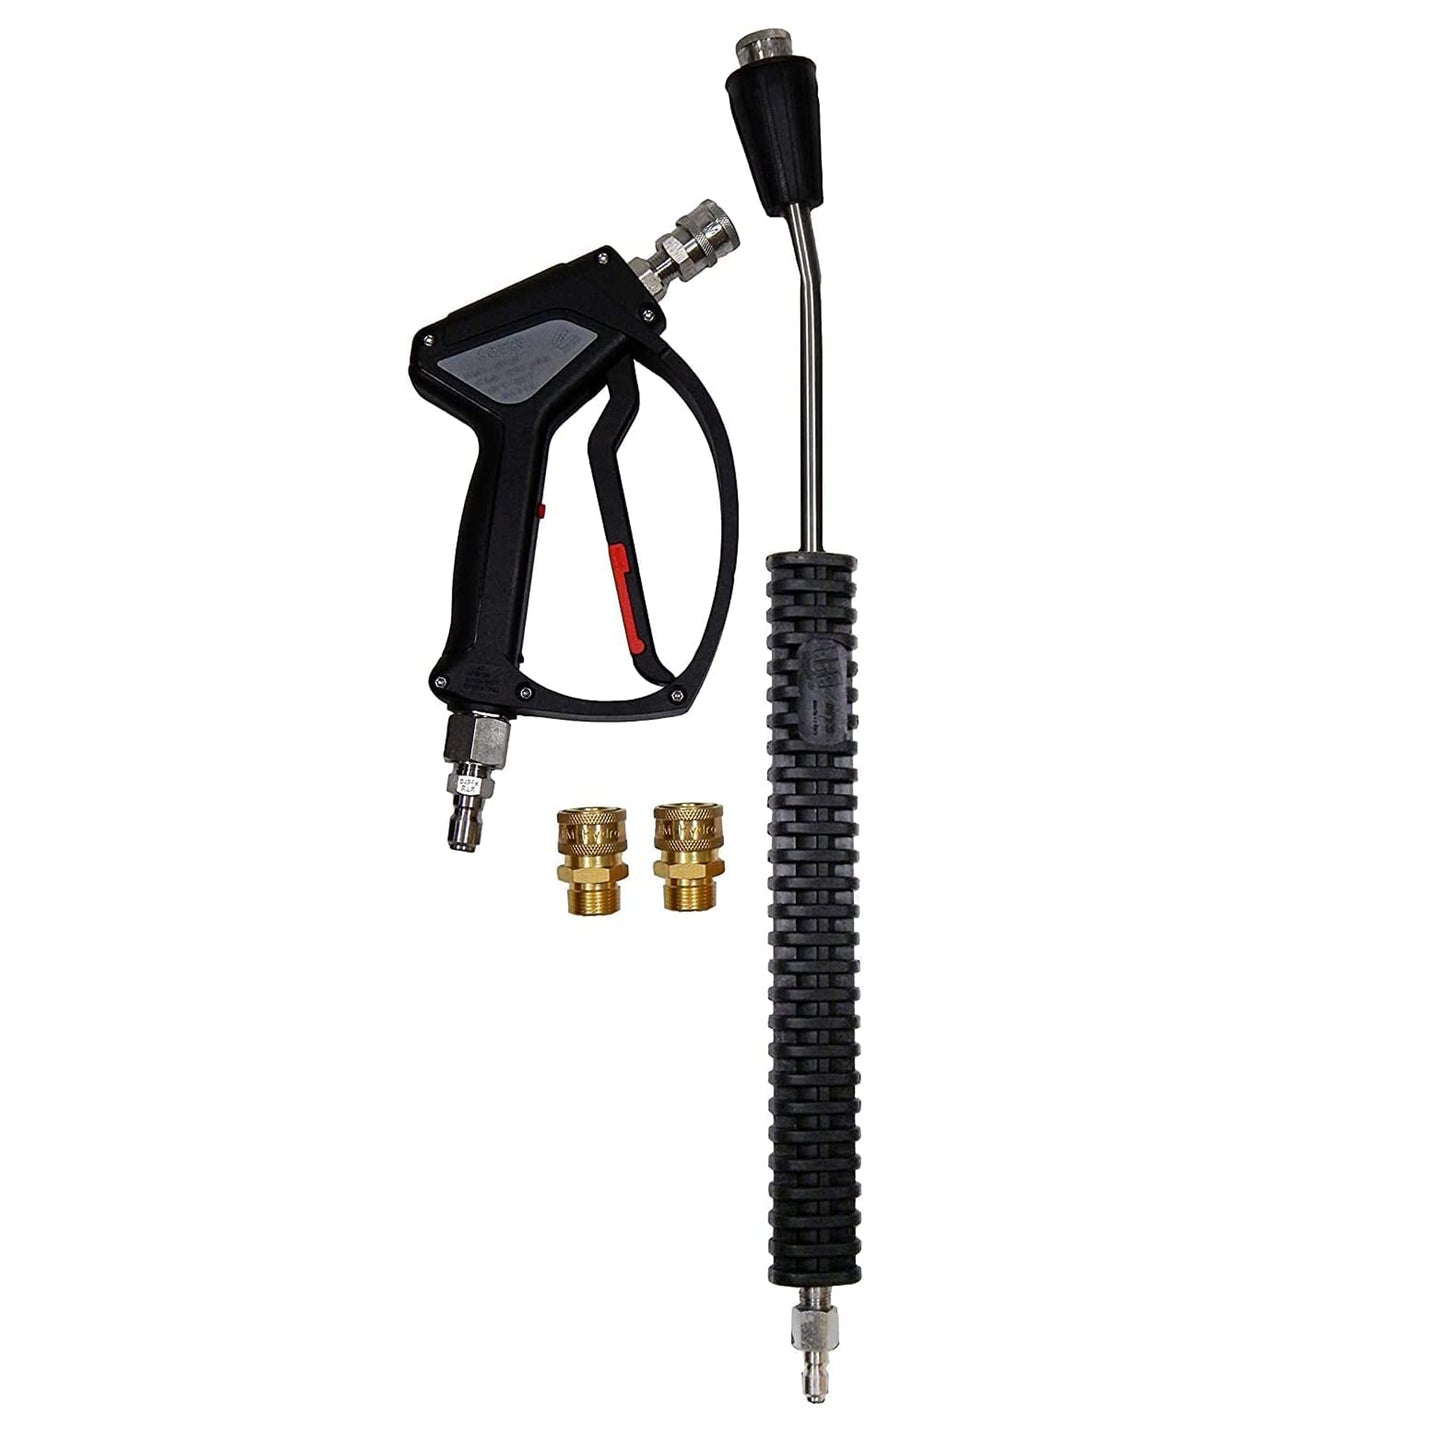 MTM Hydro Pressure Washer 20? Extension Wand and SGS28 Spray Gun Kit High Pressure Sprayer with Live Swivel 4000 PSI for Car Wash and Auto Detailing